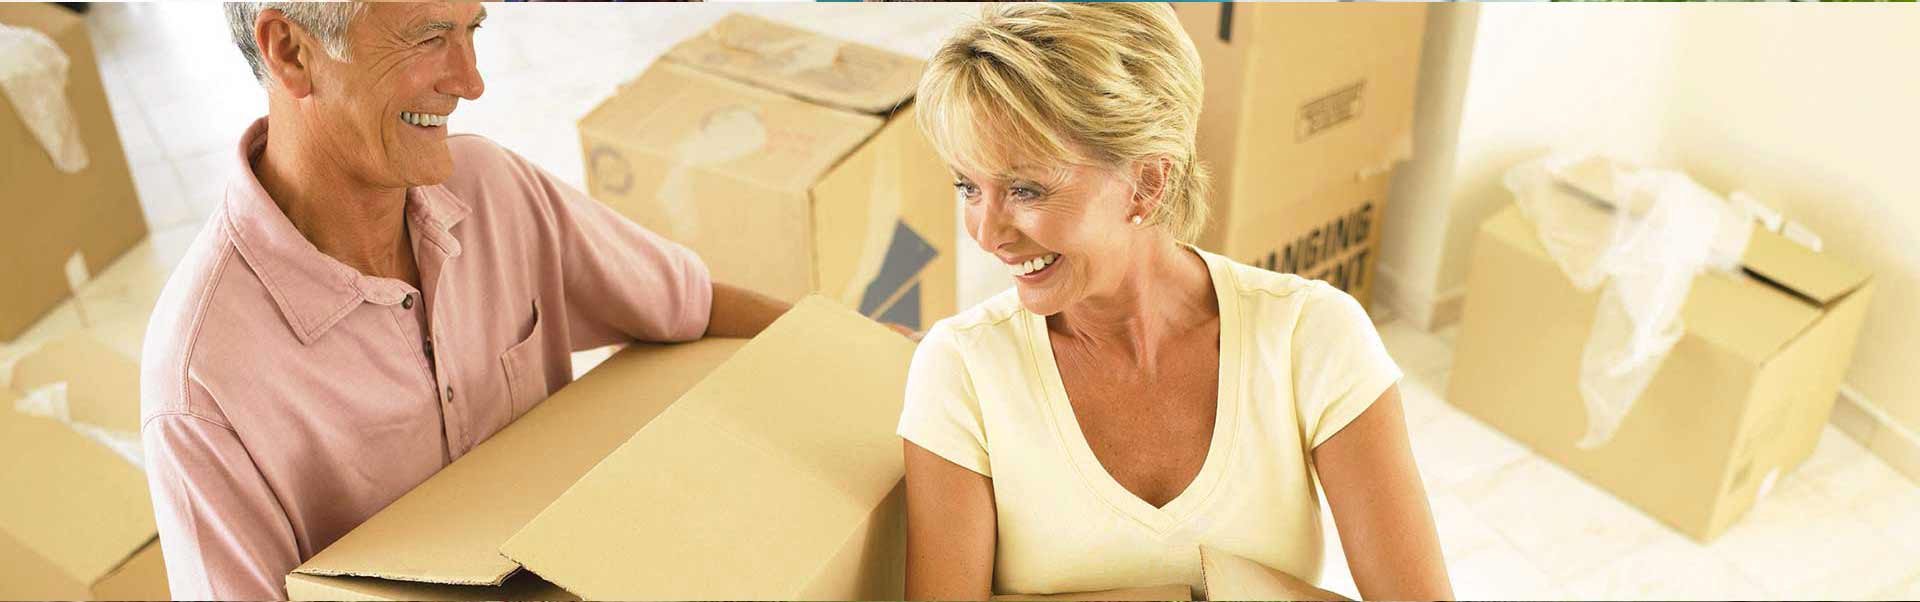 Best Moving Boxes And Supplies Cheap Cheap Moving Boxes